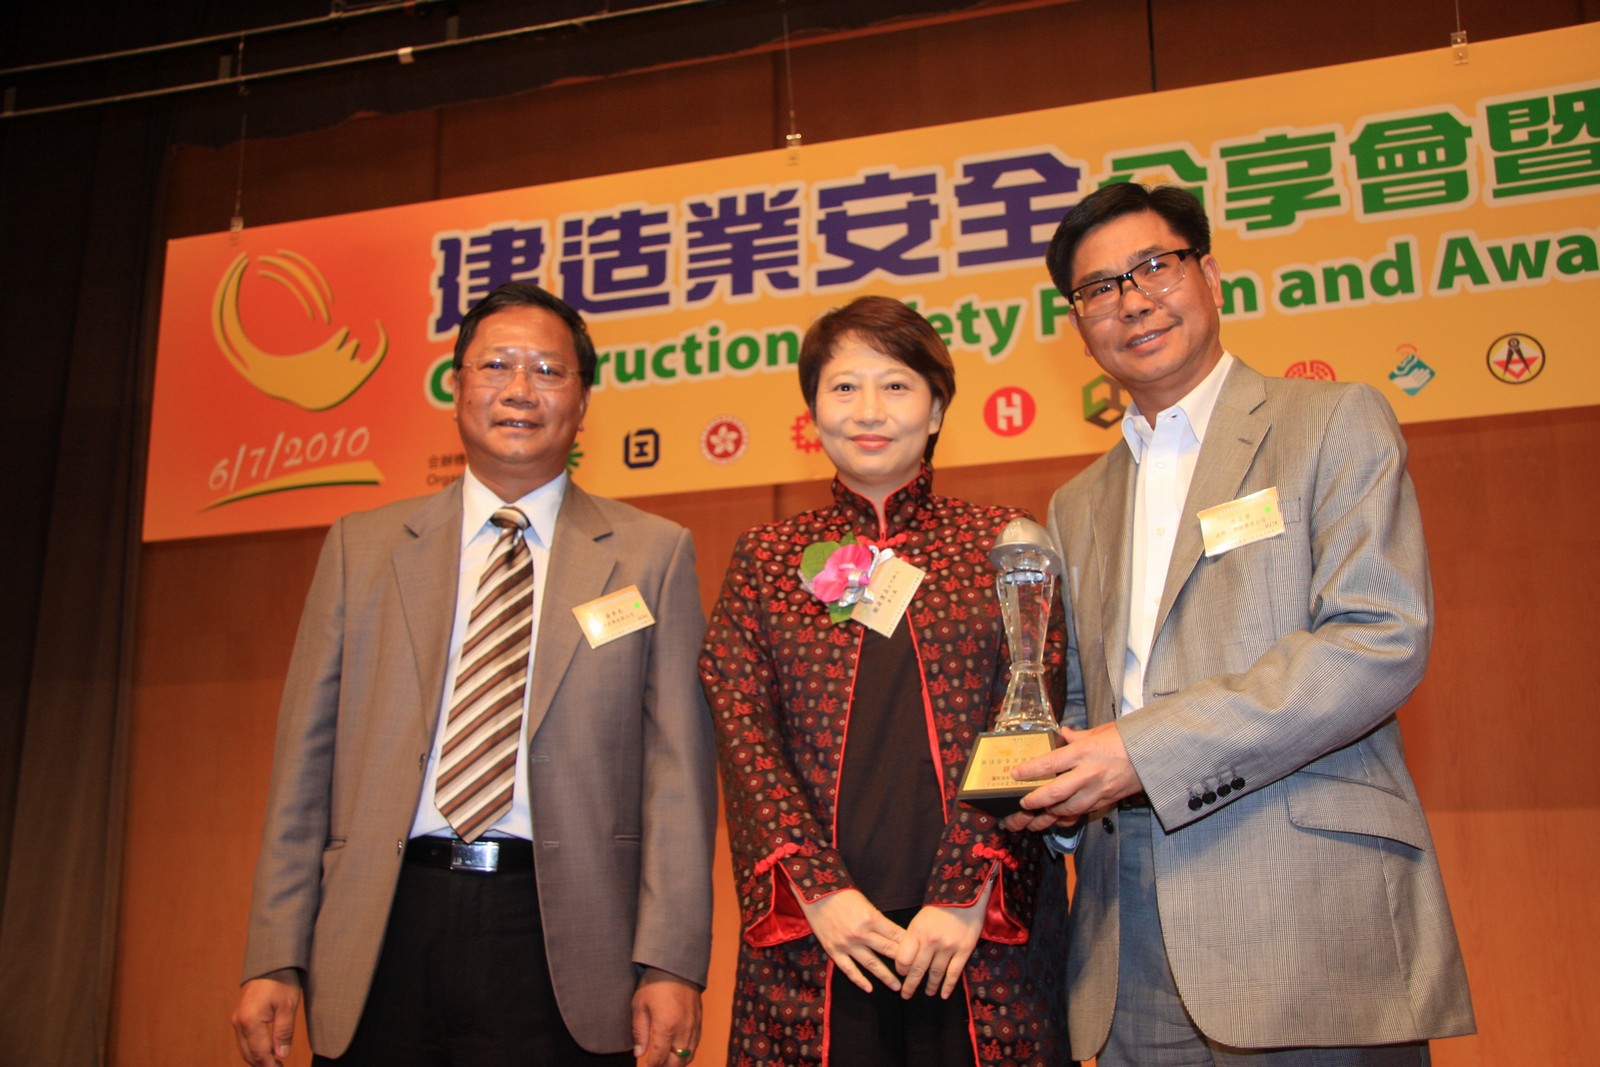 Mrs. Cherry Tse, JP, Commissioner for Labour presented various awards to Senior Project Manager (Contracts) Wong Cheuk Kwong (Left)